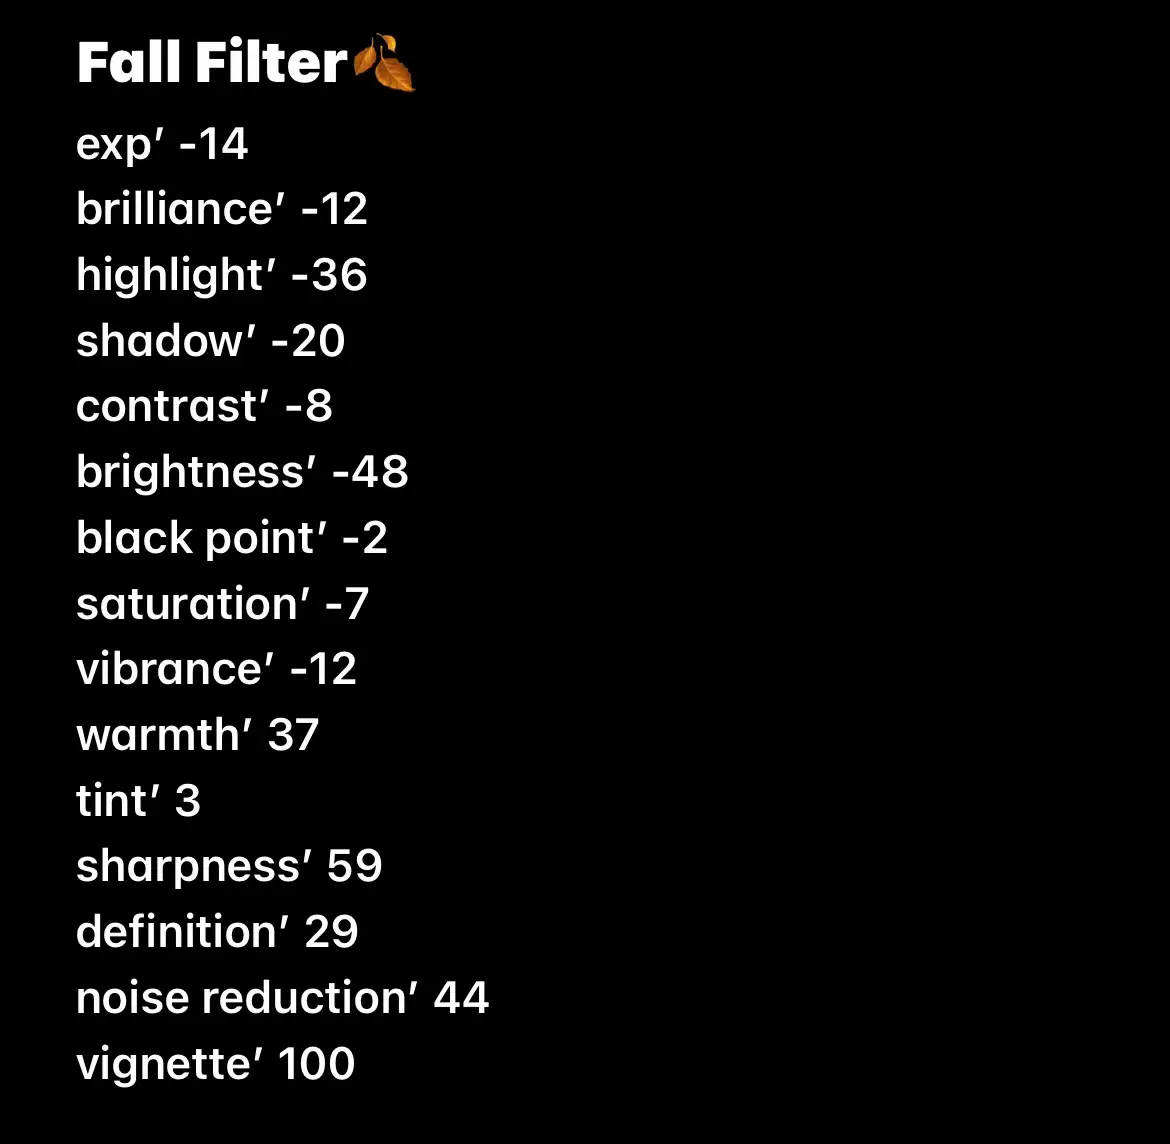  A list of different filter effects with descriptions